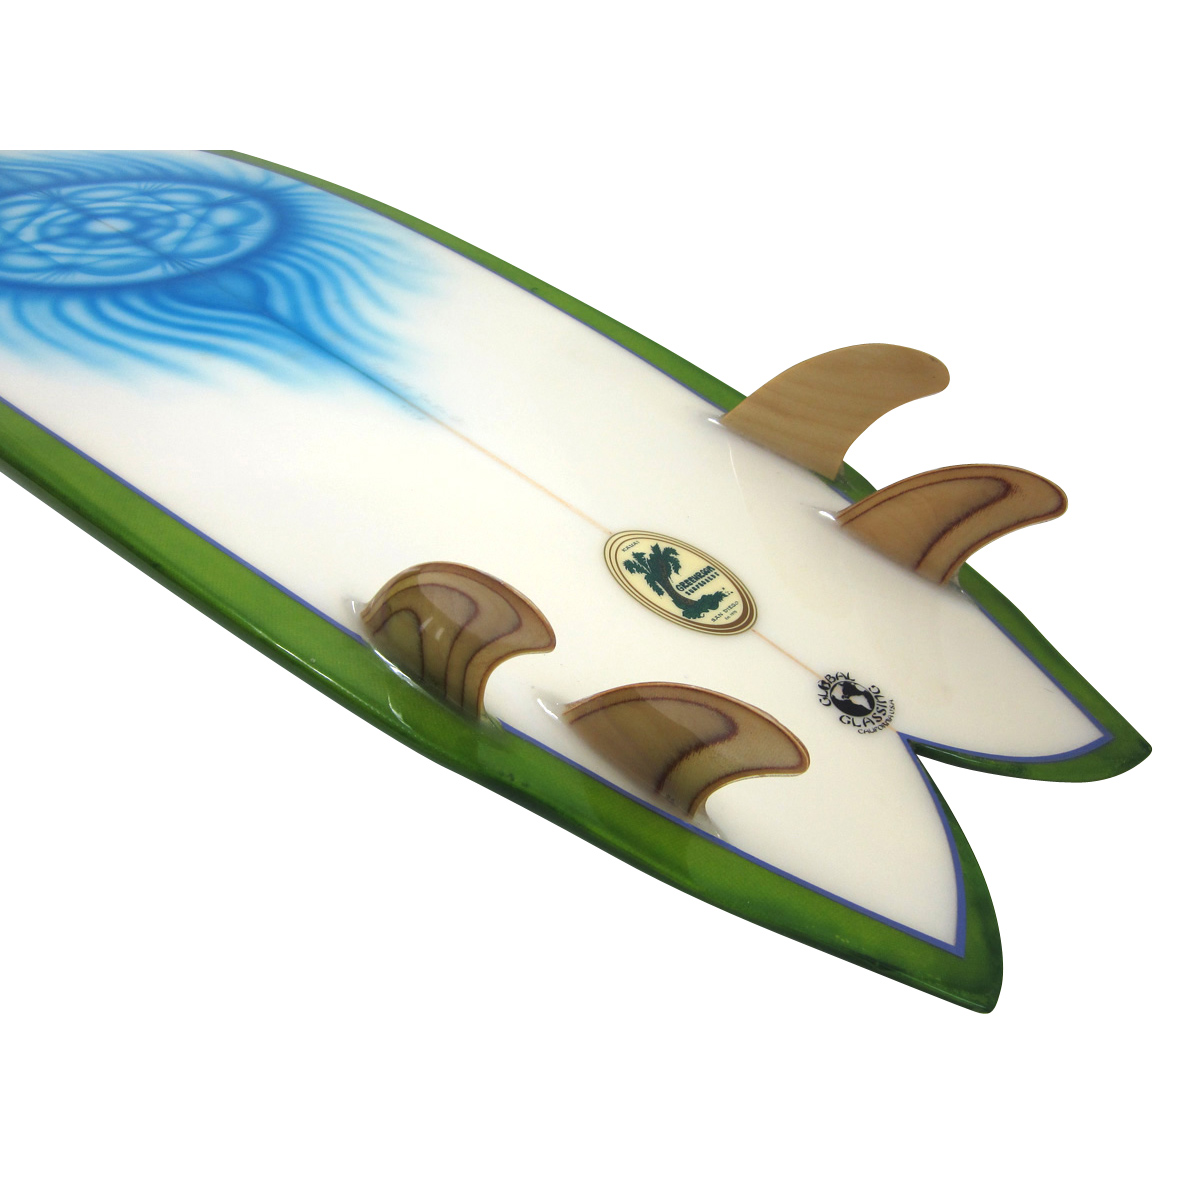 Rainbow / Quan 5`6 Shaped By Rich Pavel GREEN ROOM SURFBOARDS